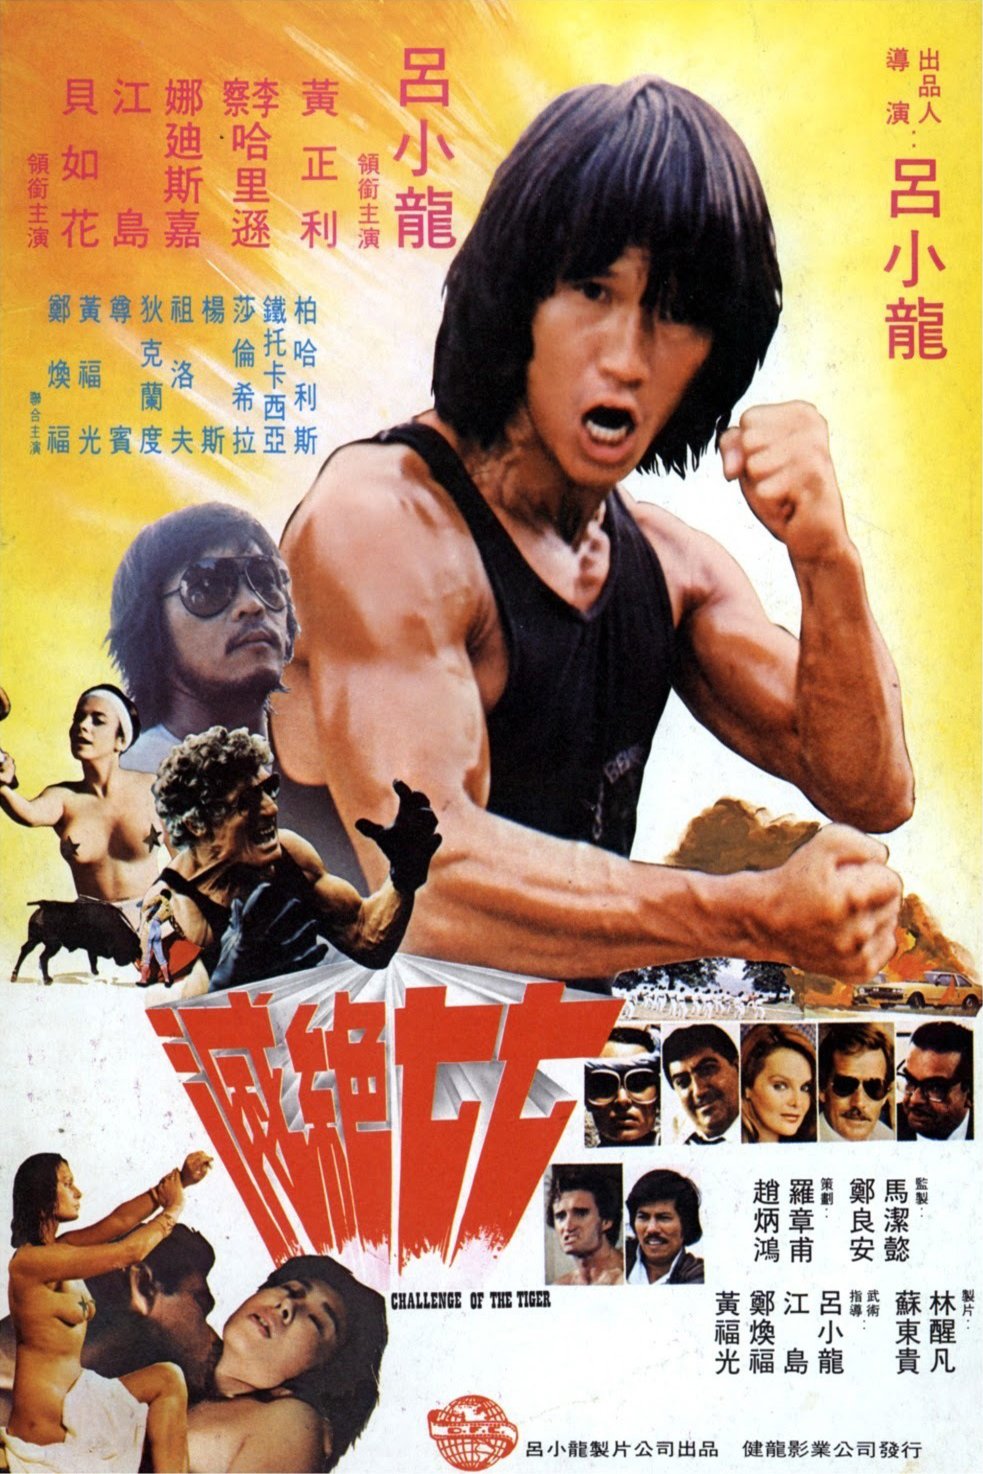 Poster of the movie Challenge of the Tiger